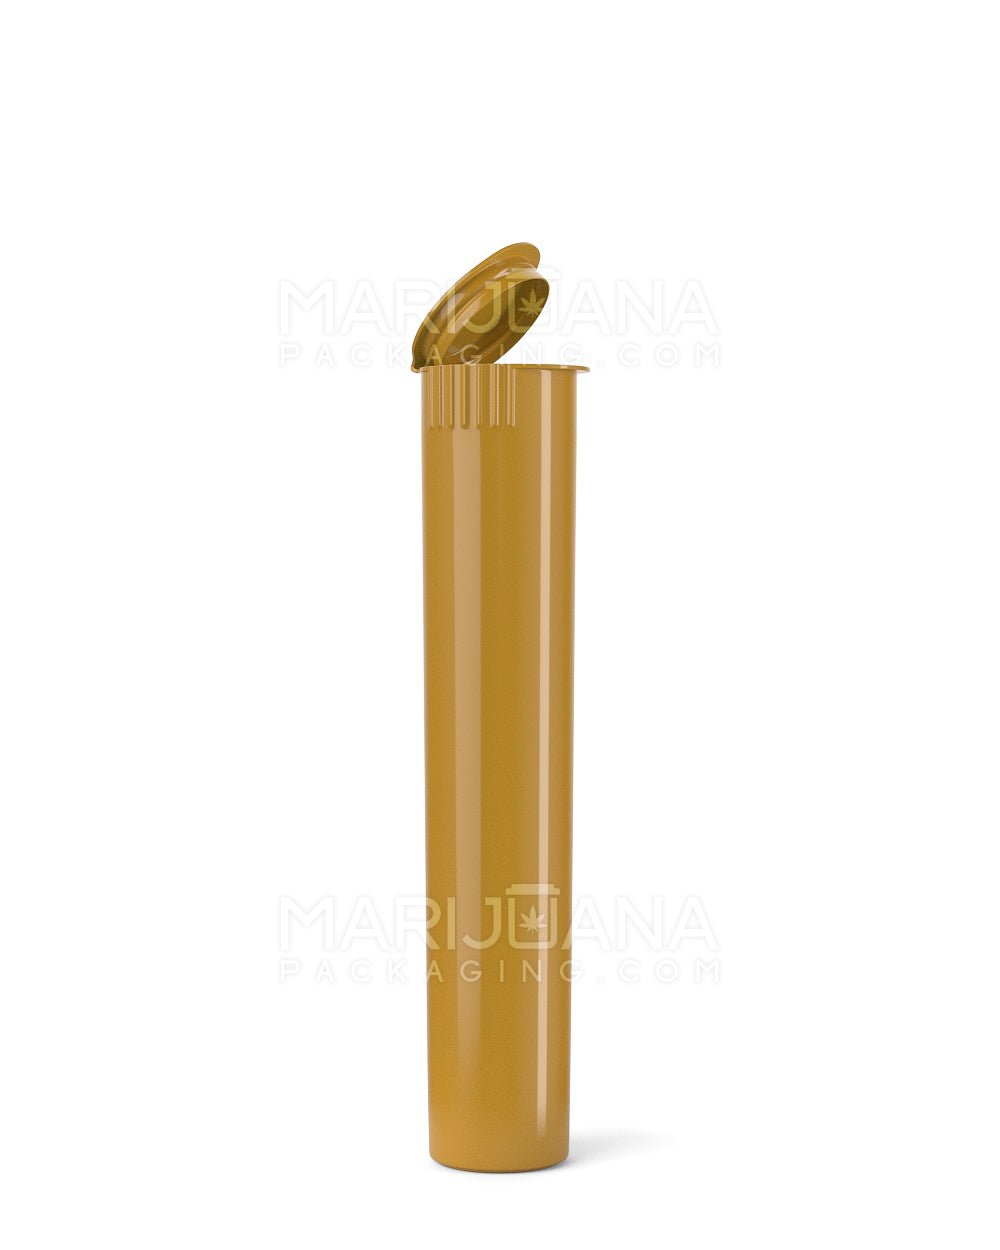 Child Resistant | Pop Top Opaque Plastic Pre-Roll Tubes | 95mm - Gold - 1000 Count - 1